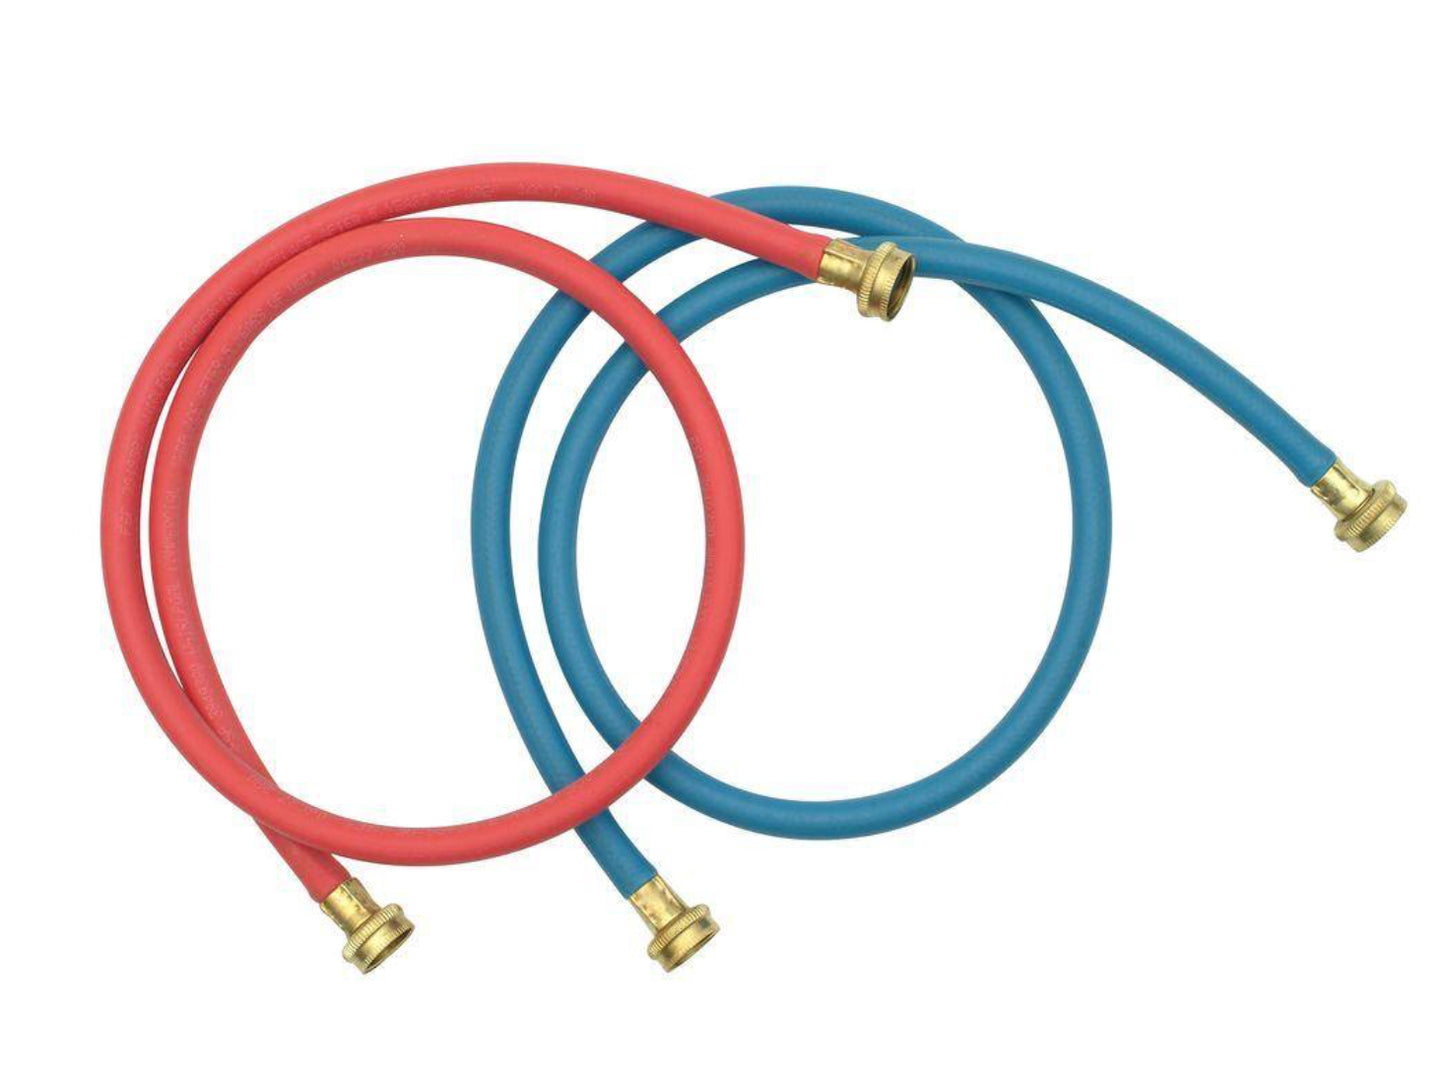 Whirlpool 5 ft. Commercial Grade Washer Hoses (2-Pack)